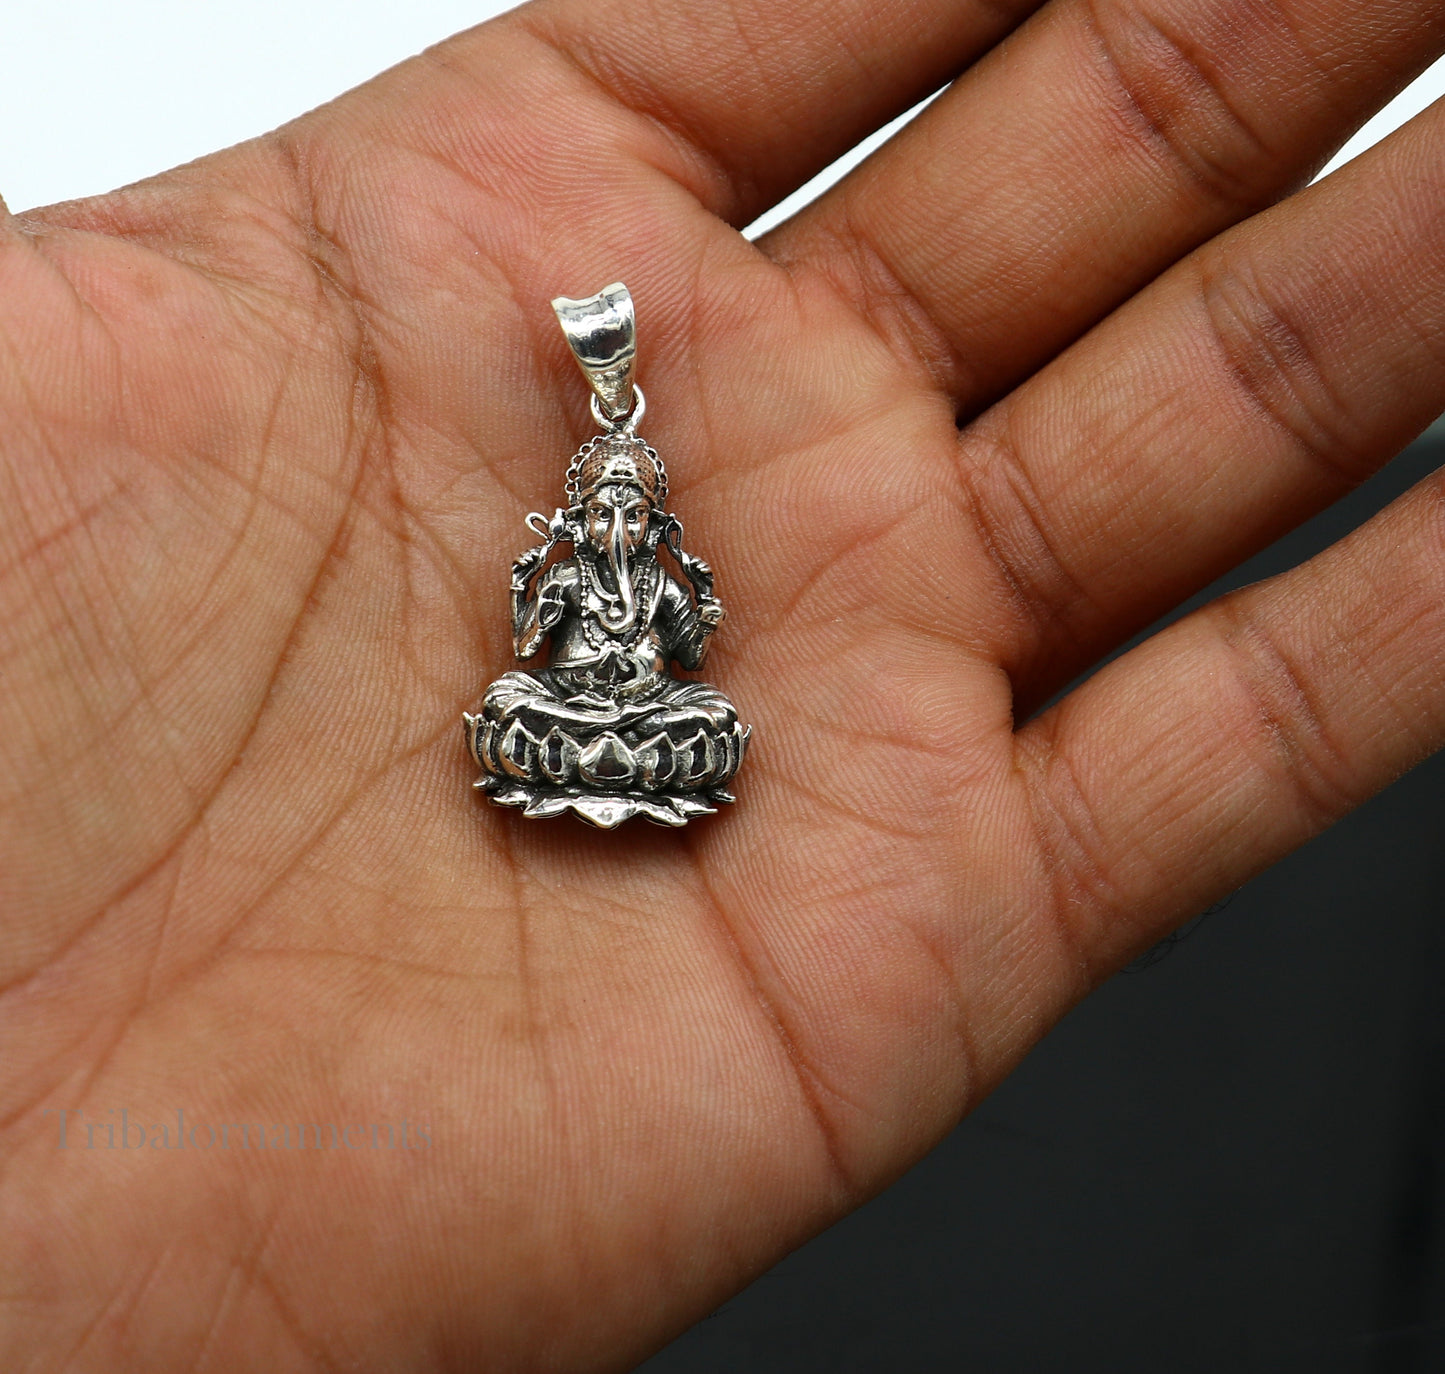 Divine lord Ganesha sitting on lotus blessing pendant, excellent vintage designer 925 sterling silver handmade jewelry from india ssp959 - TRIBAL ORNAMENTS